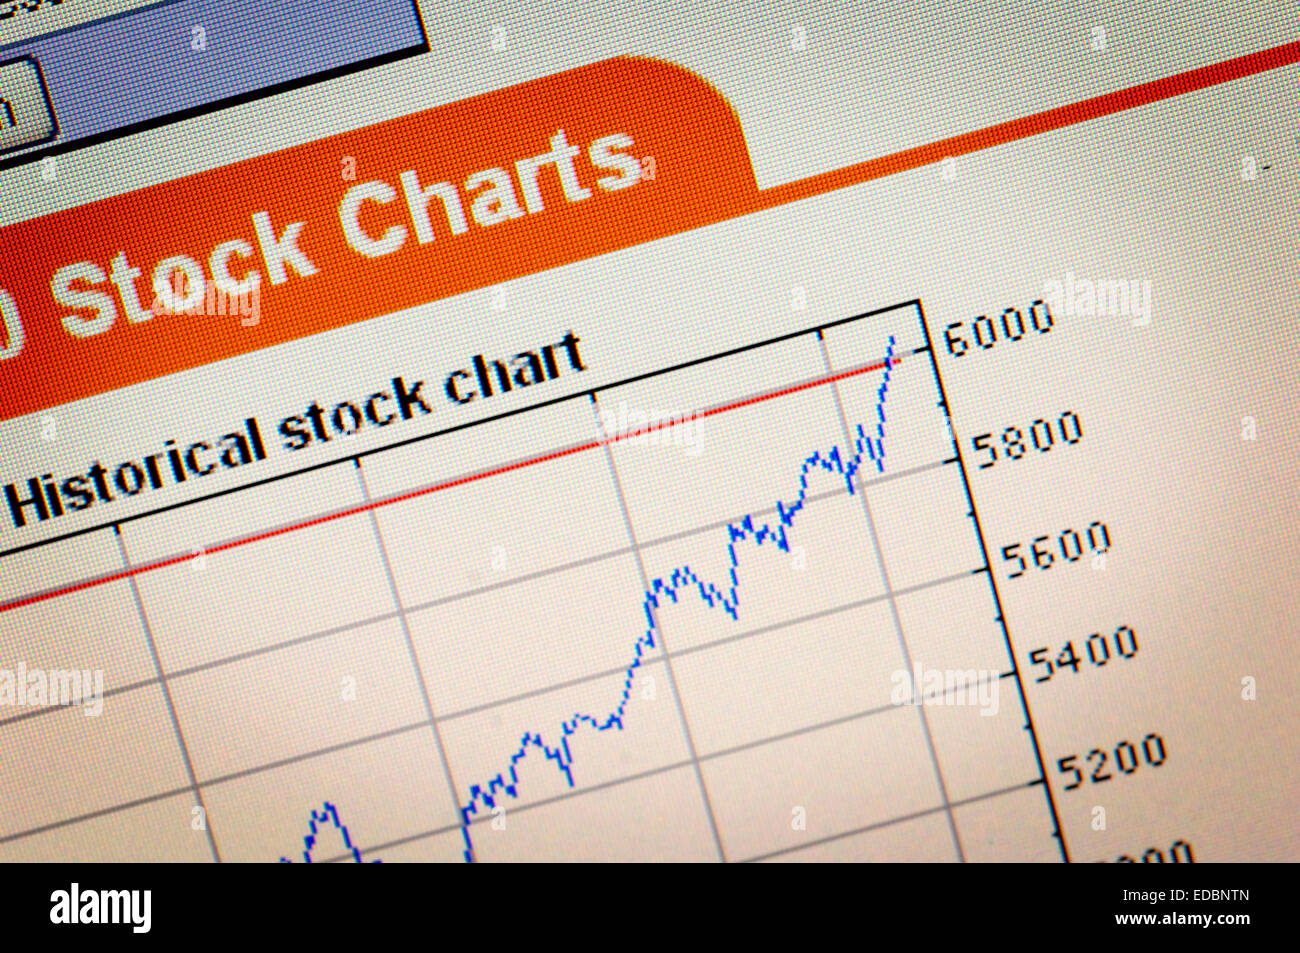 Figurative image of a FTSE 100 shares performance chart. Stock Photo